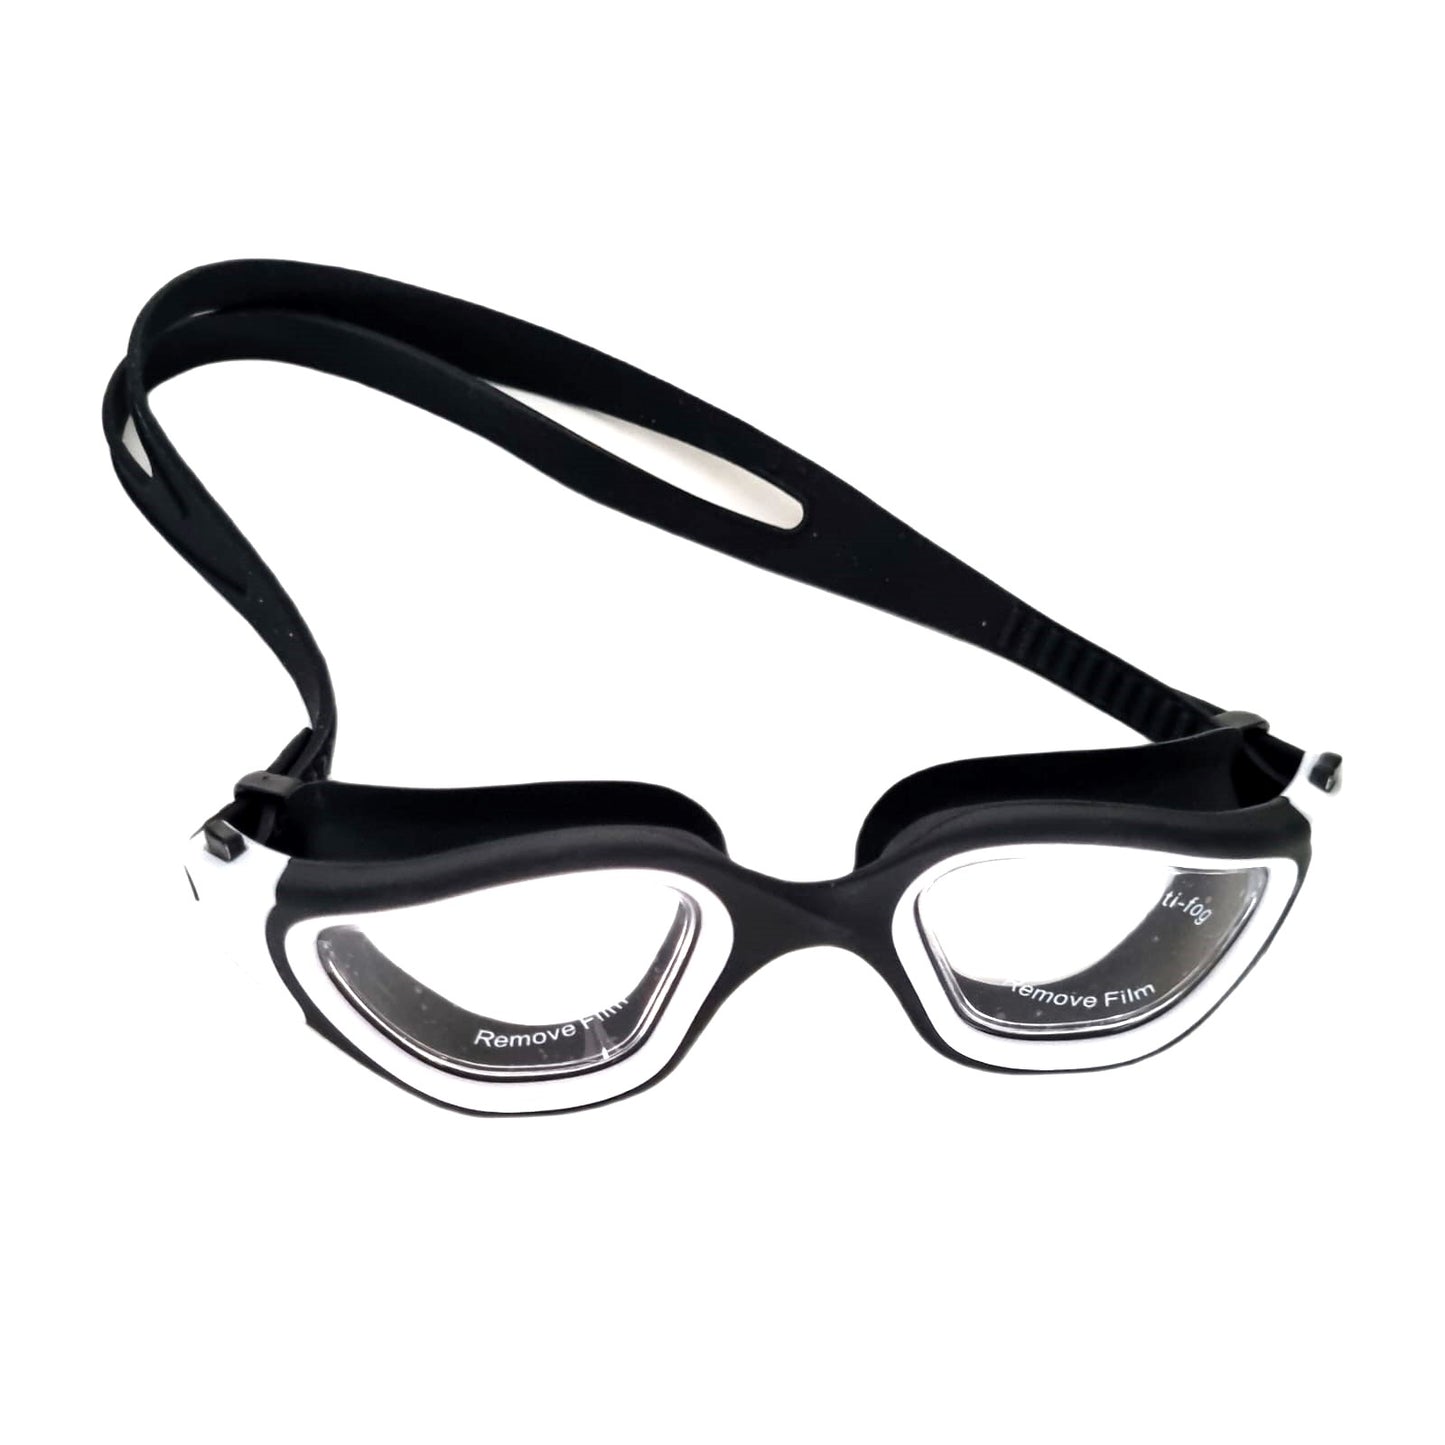 FLOWOLF FH1 Open Water Goggles - Wht/Blk Clear Lens